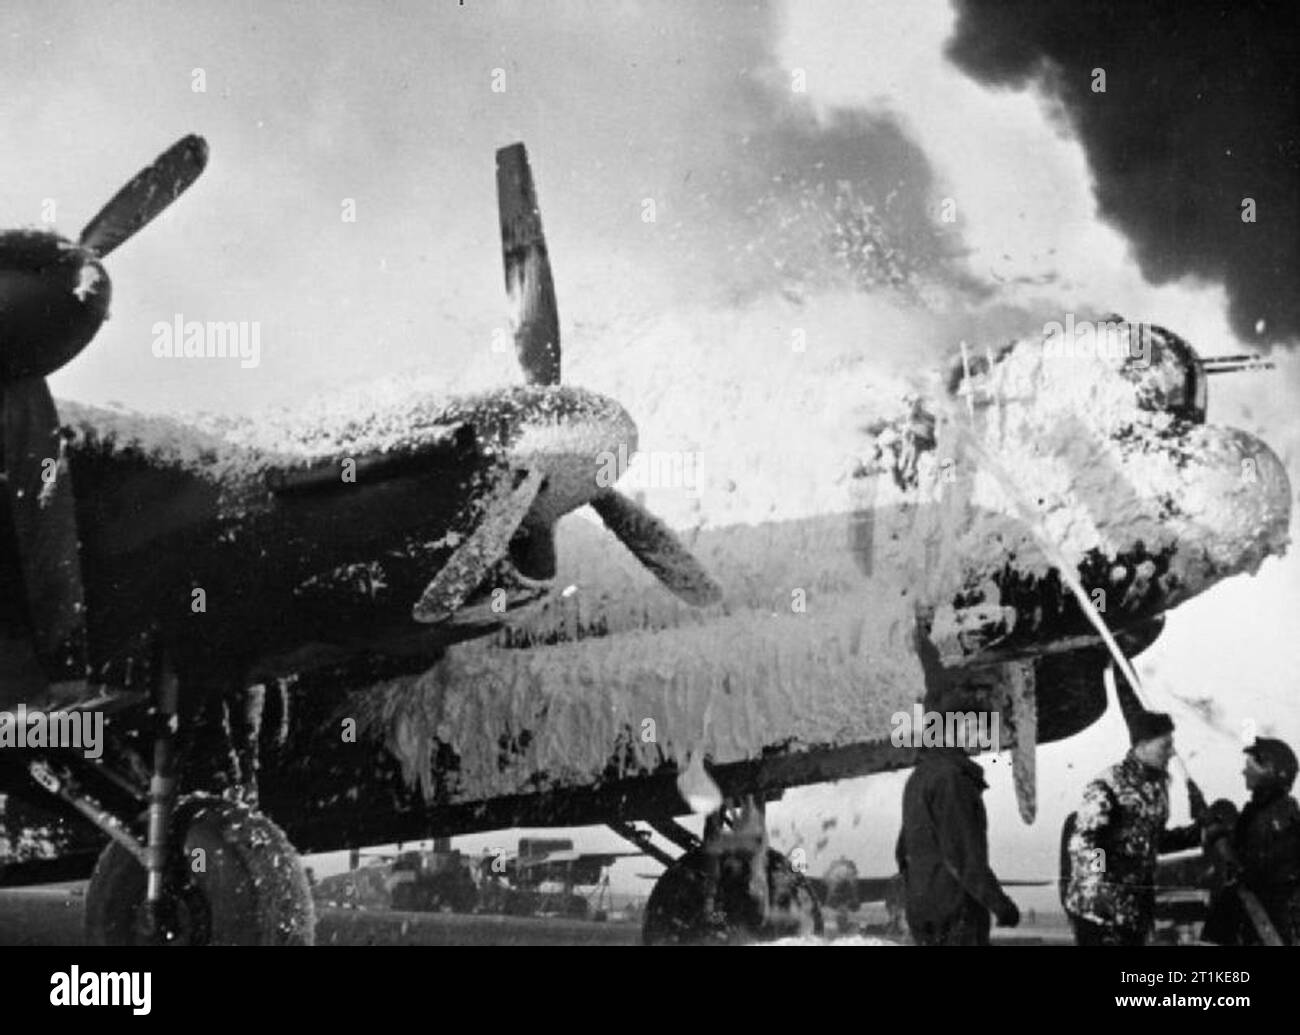 Royal Air Force Bomber Command, 1942-1945. Fire crews cover an Avro Lancaster of Bomber Command with foam in an effort to save it from burning, at B58/Melsbroek, Belgium, following the attack on the airfield by Luftwaffe fighter-bombers, (Operation BODENPLATTE). Stock Photo